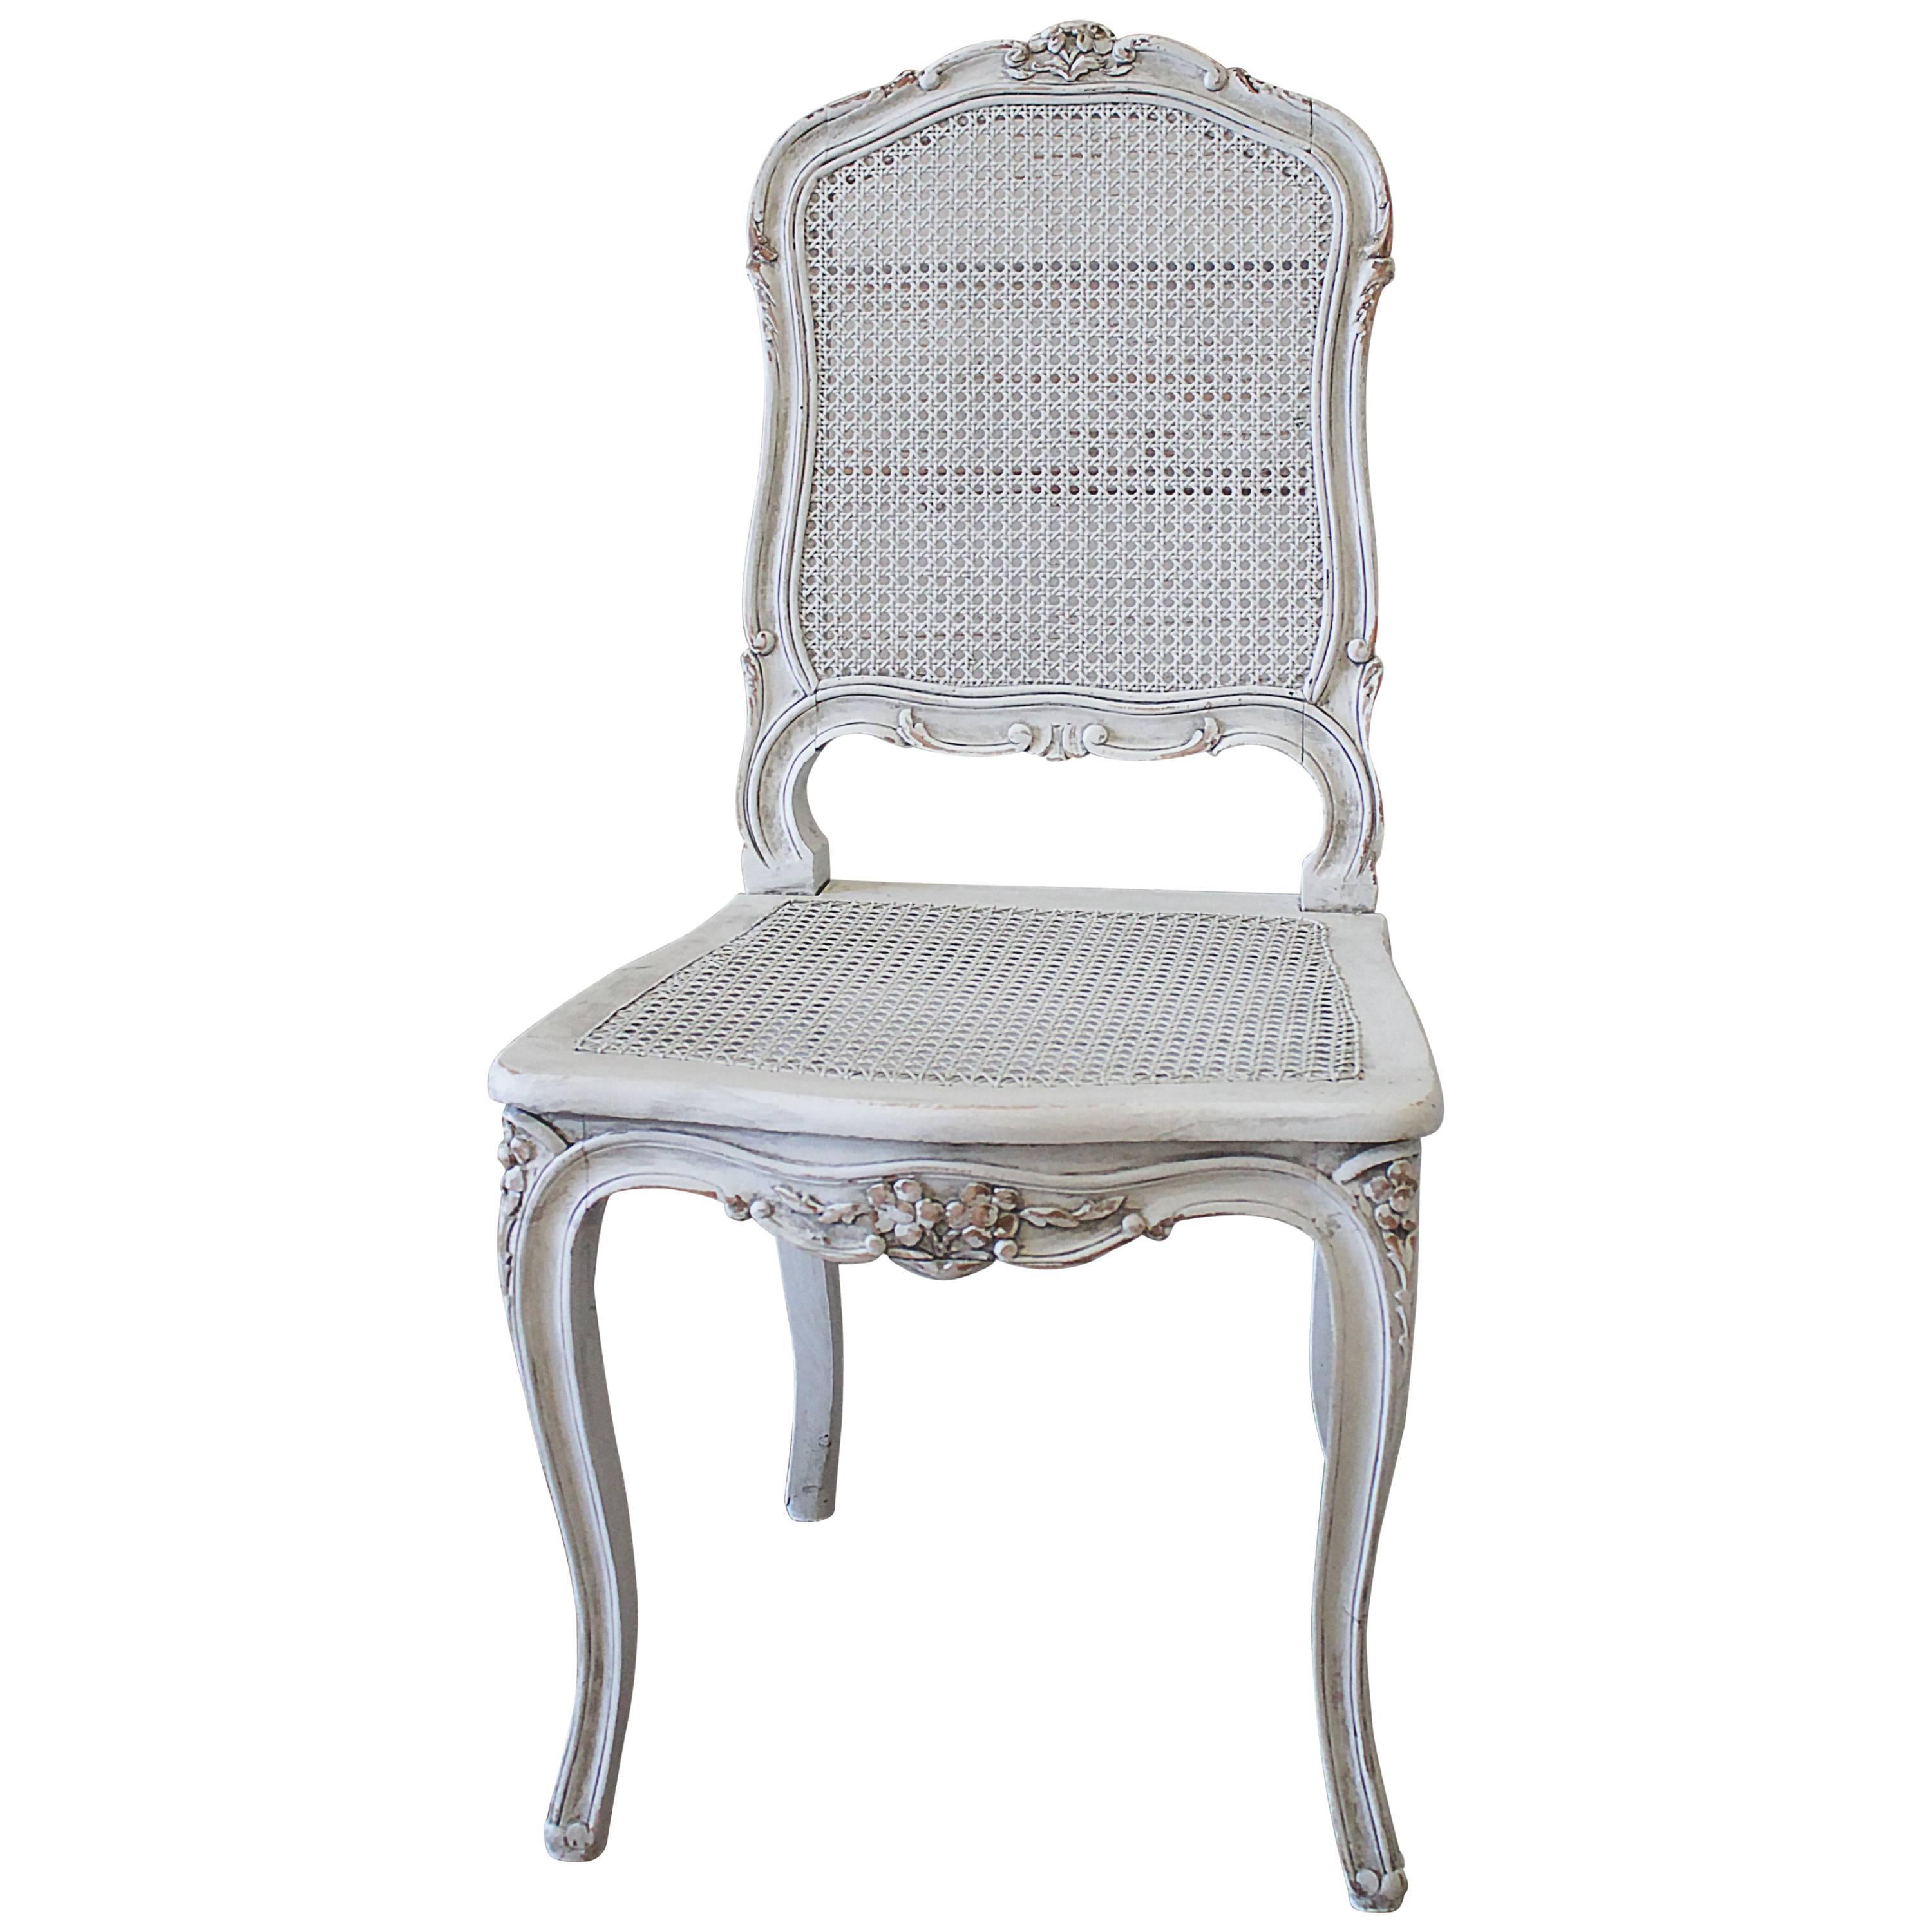 19th Century Painted Caned Vanity Chair in the Louis XV Style